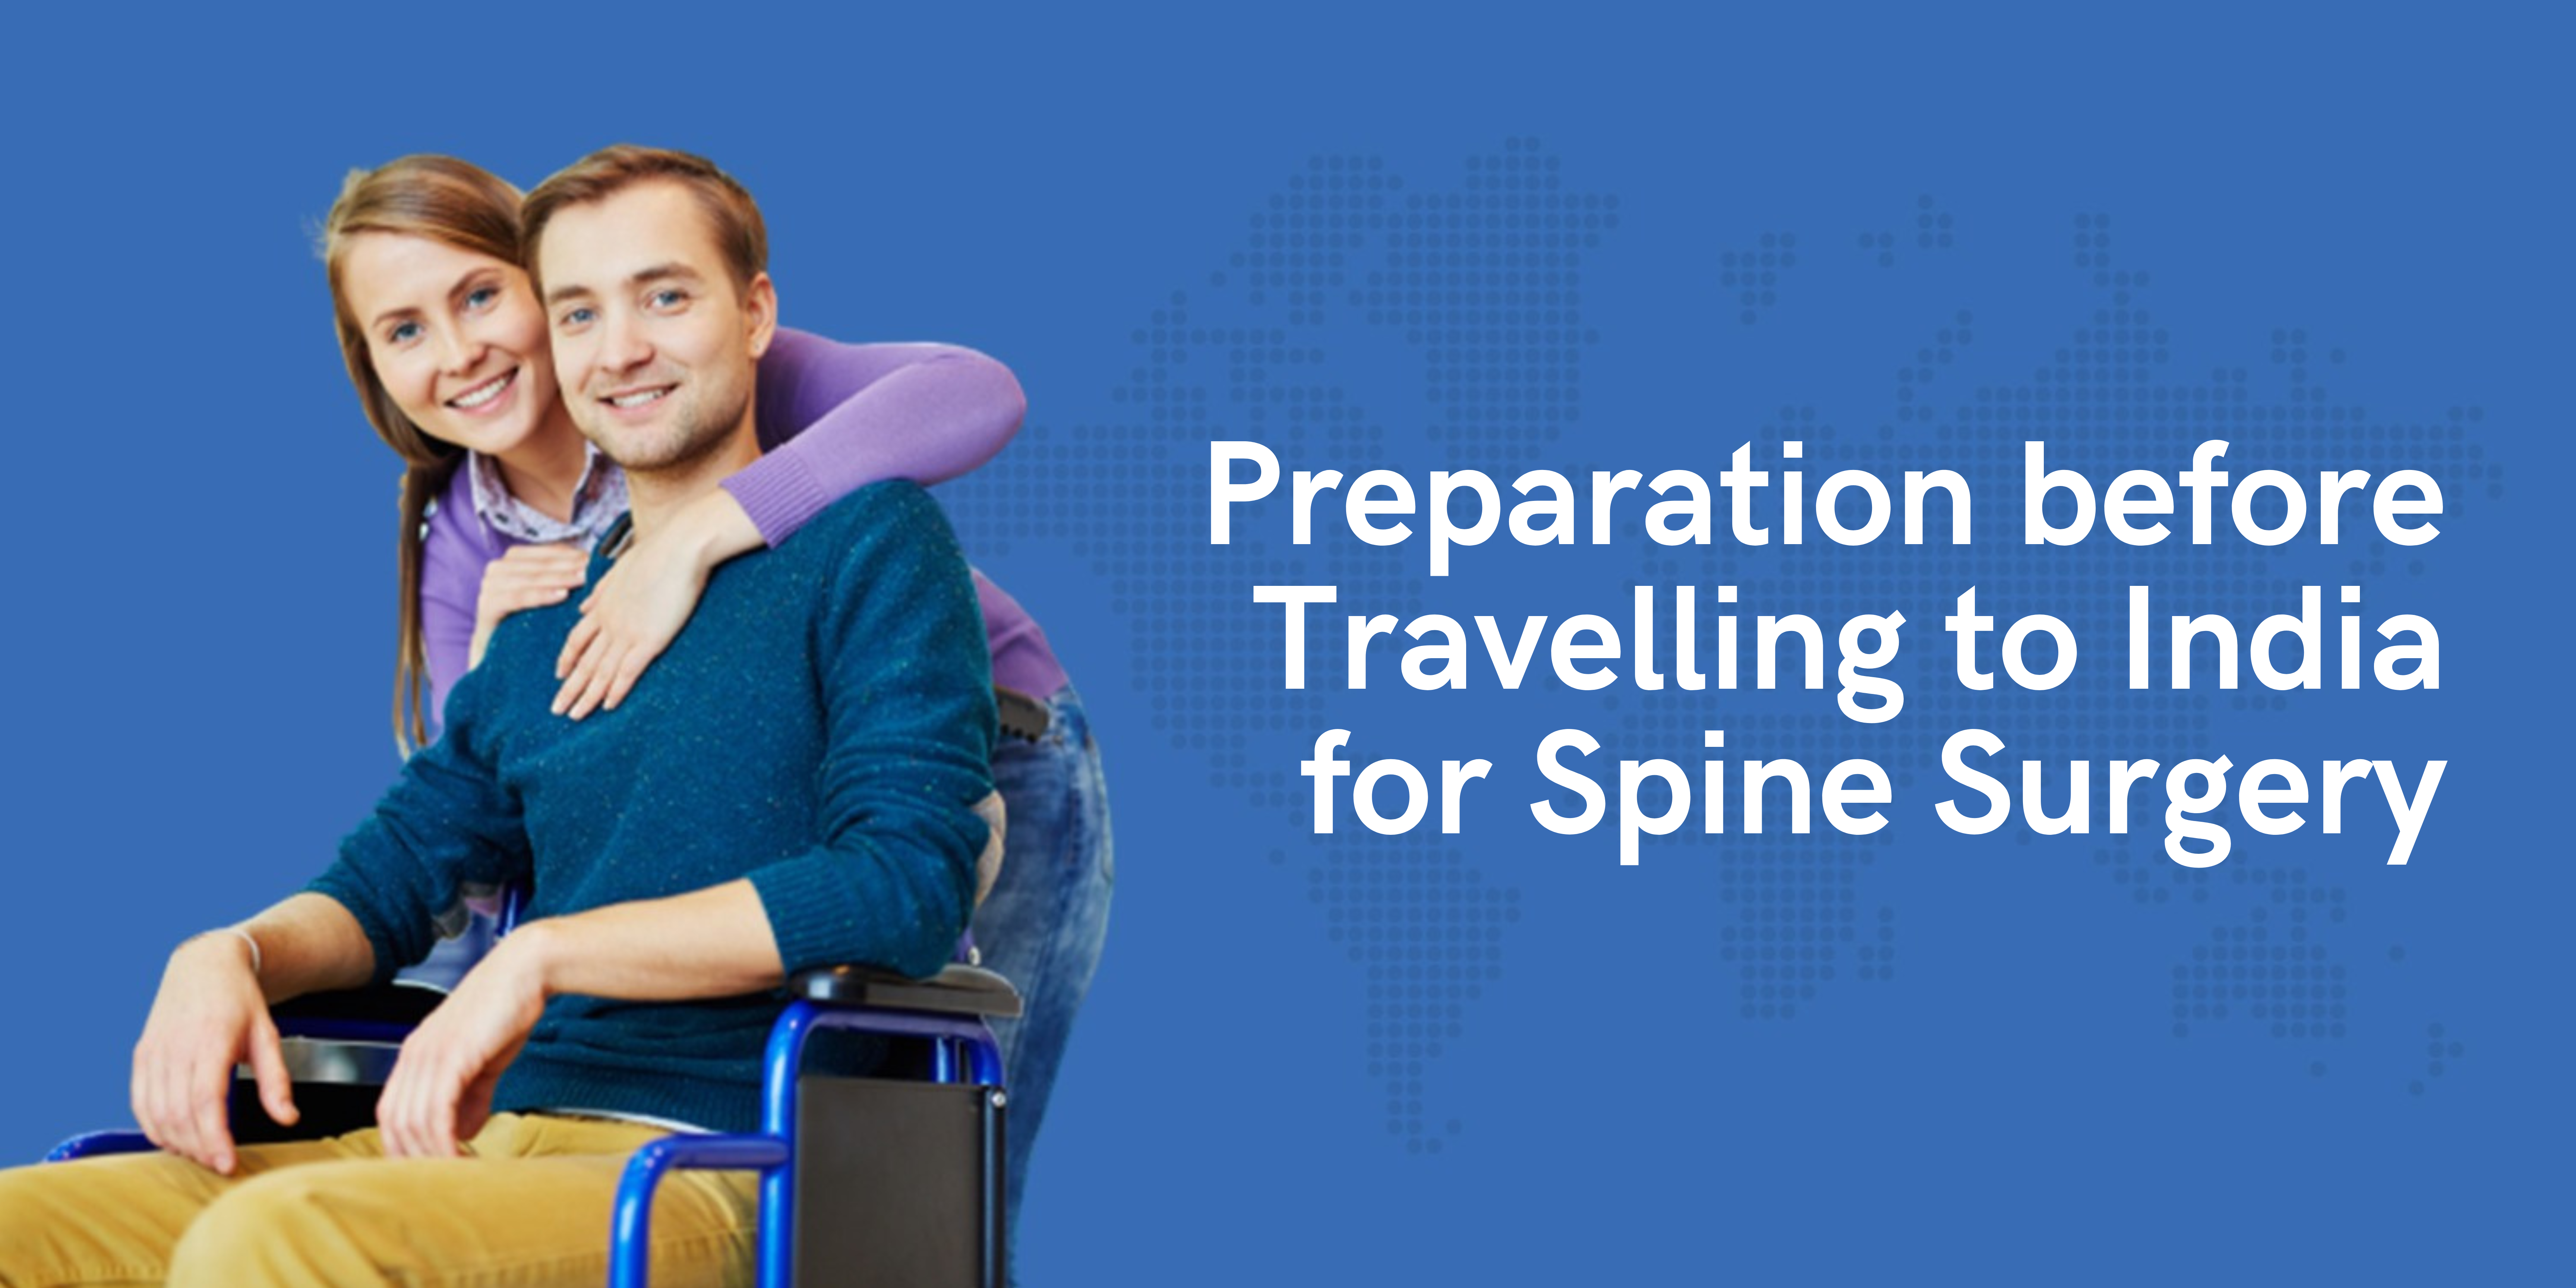 Preparation before Travelling to India for Spine Surgery